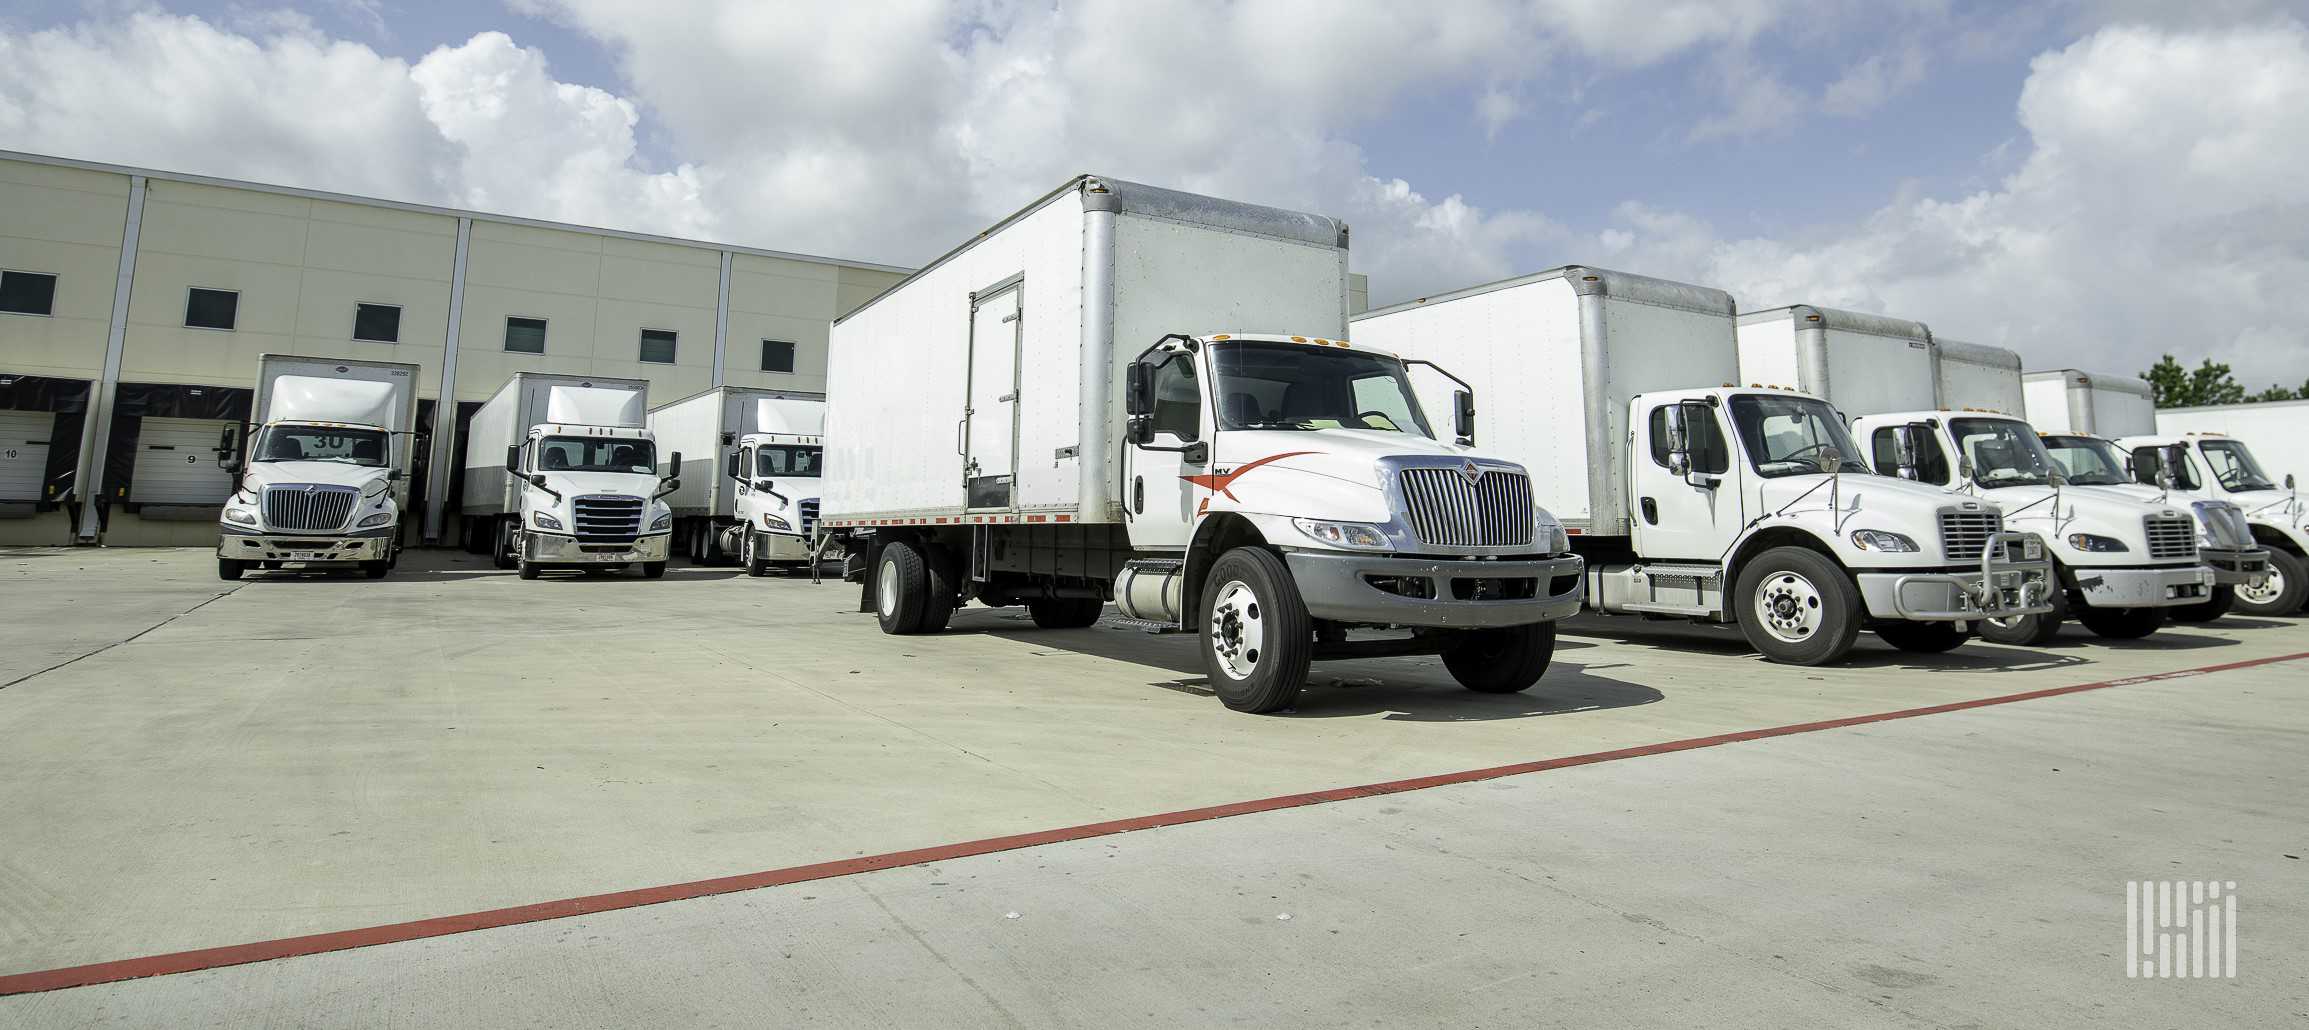 How Much Does Box Truck Insurance Cost?